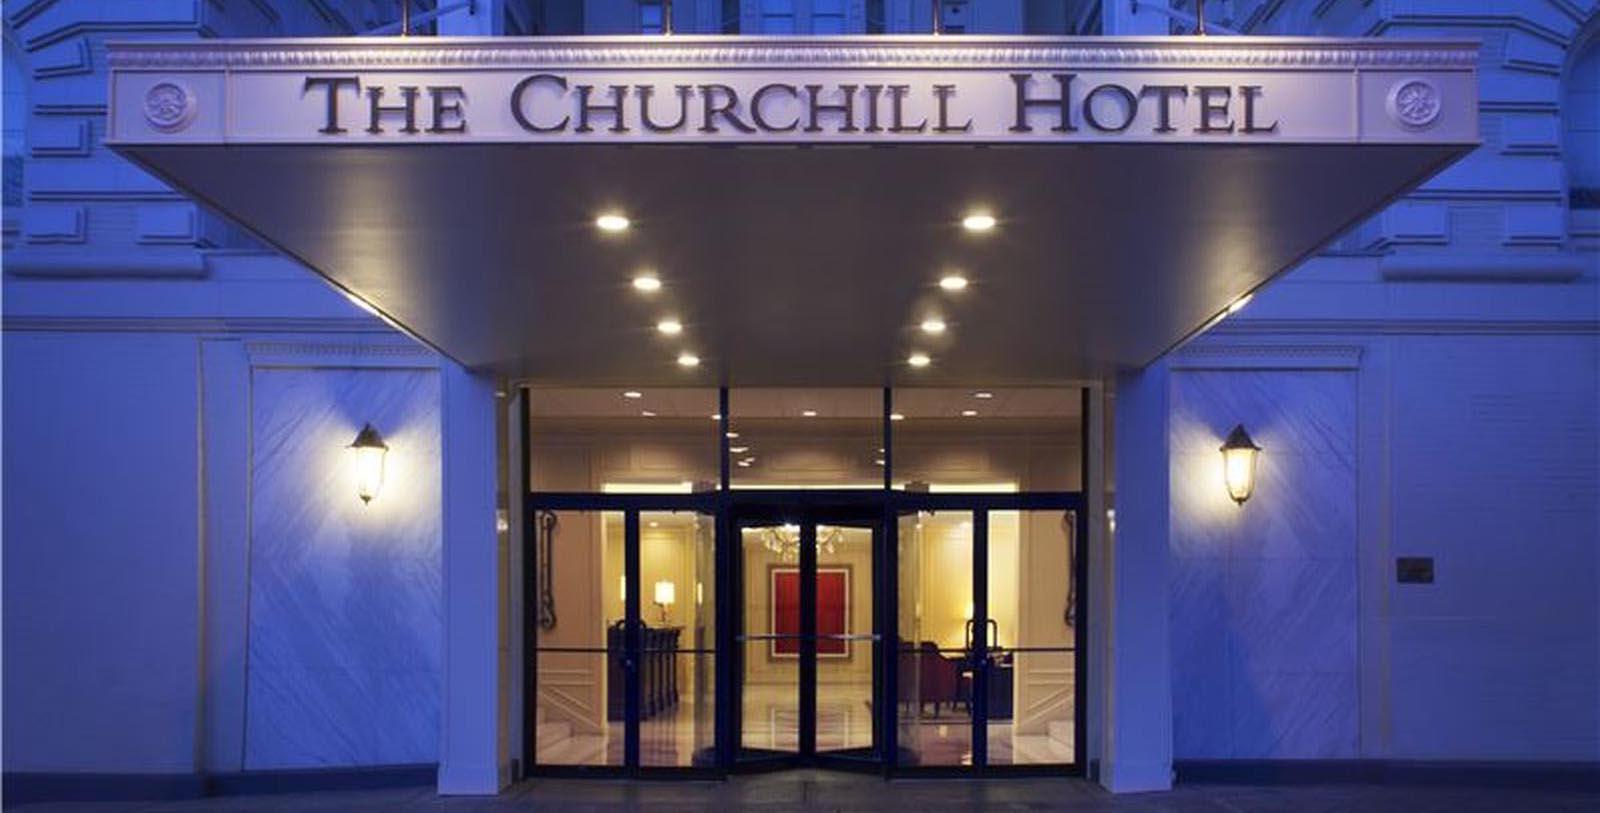 Image of Entrance The Churchill, 1906, Member of Historic Hotels of America, in Washington, DC, Special Offers, Discounted Rates, Families, Romantic Escape, Honeymoons, Anniversaries, Reunions